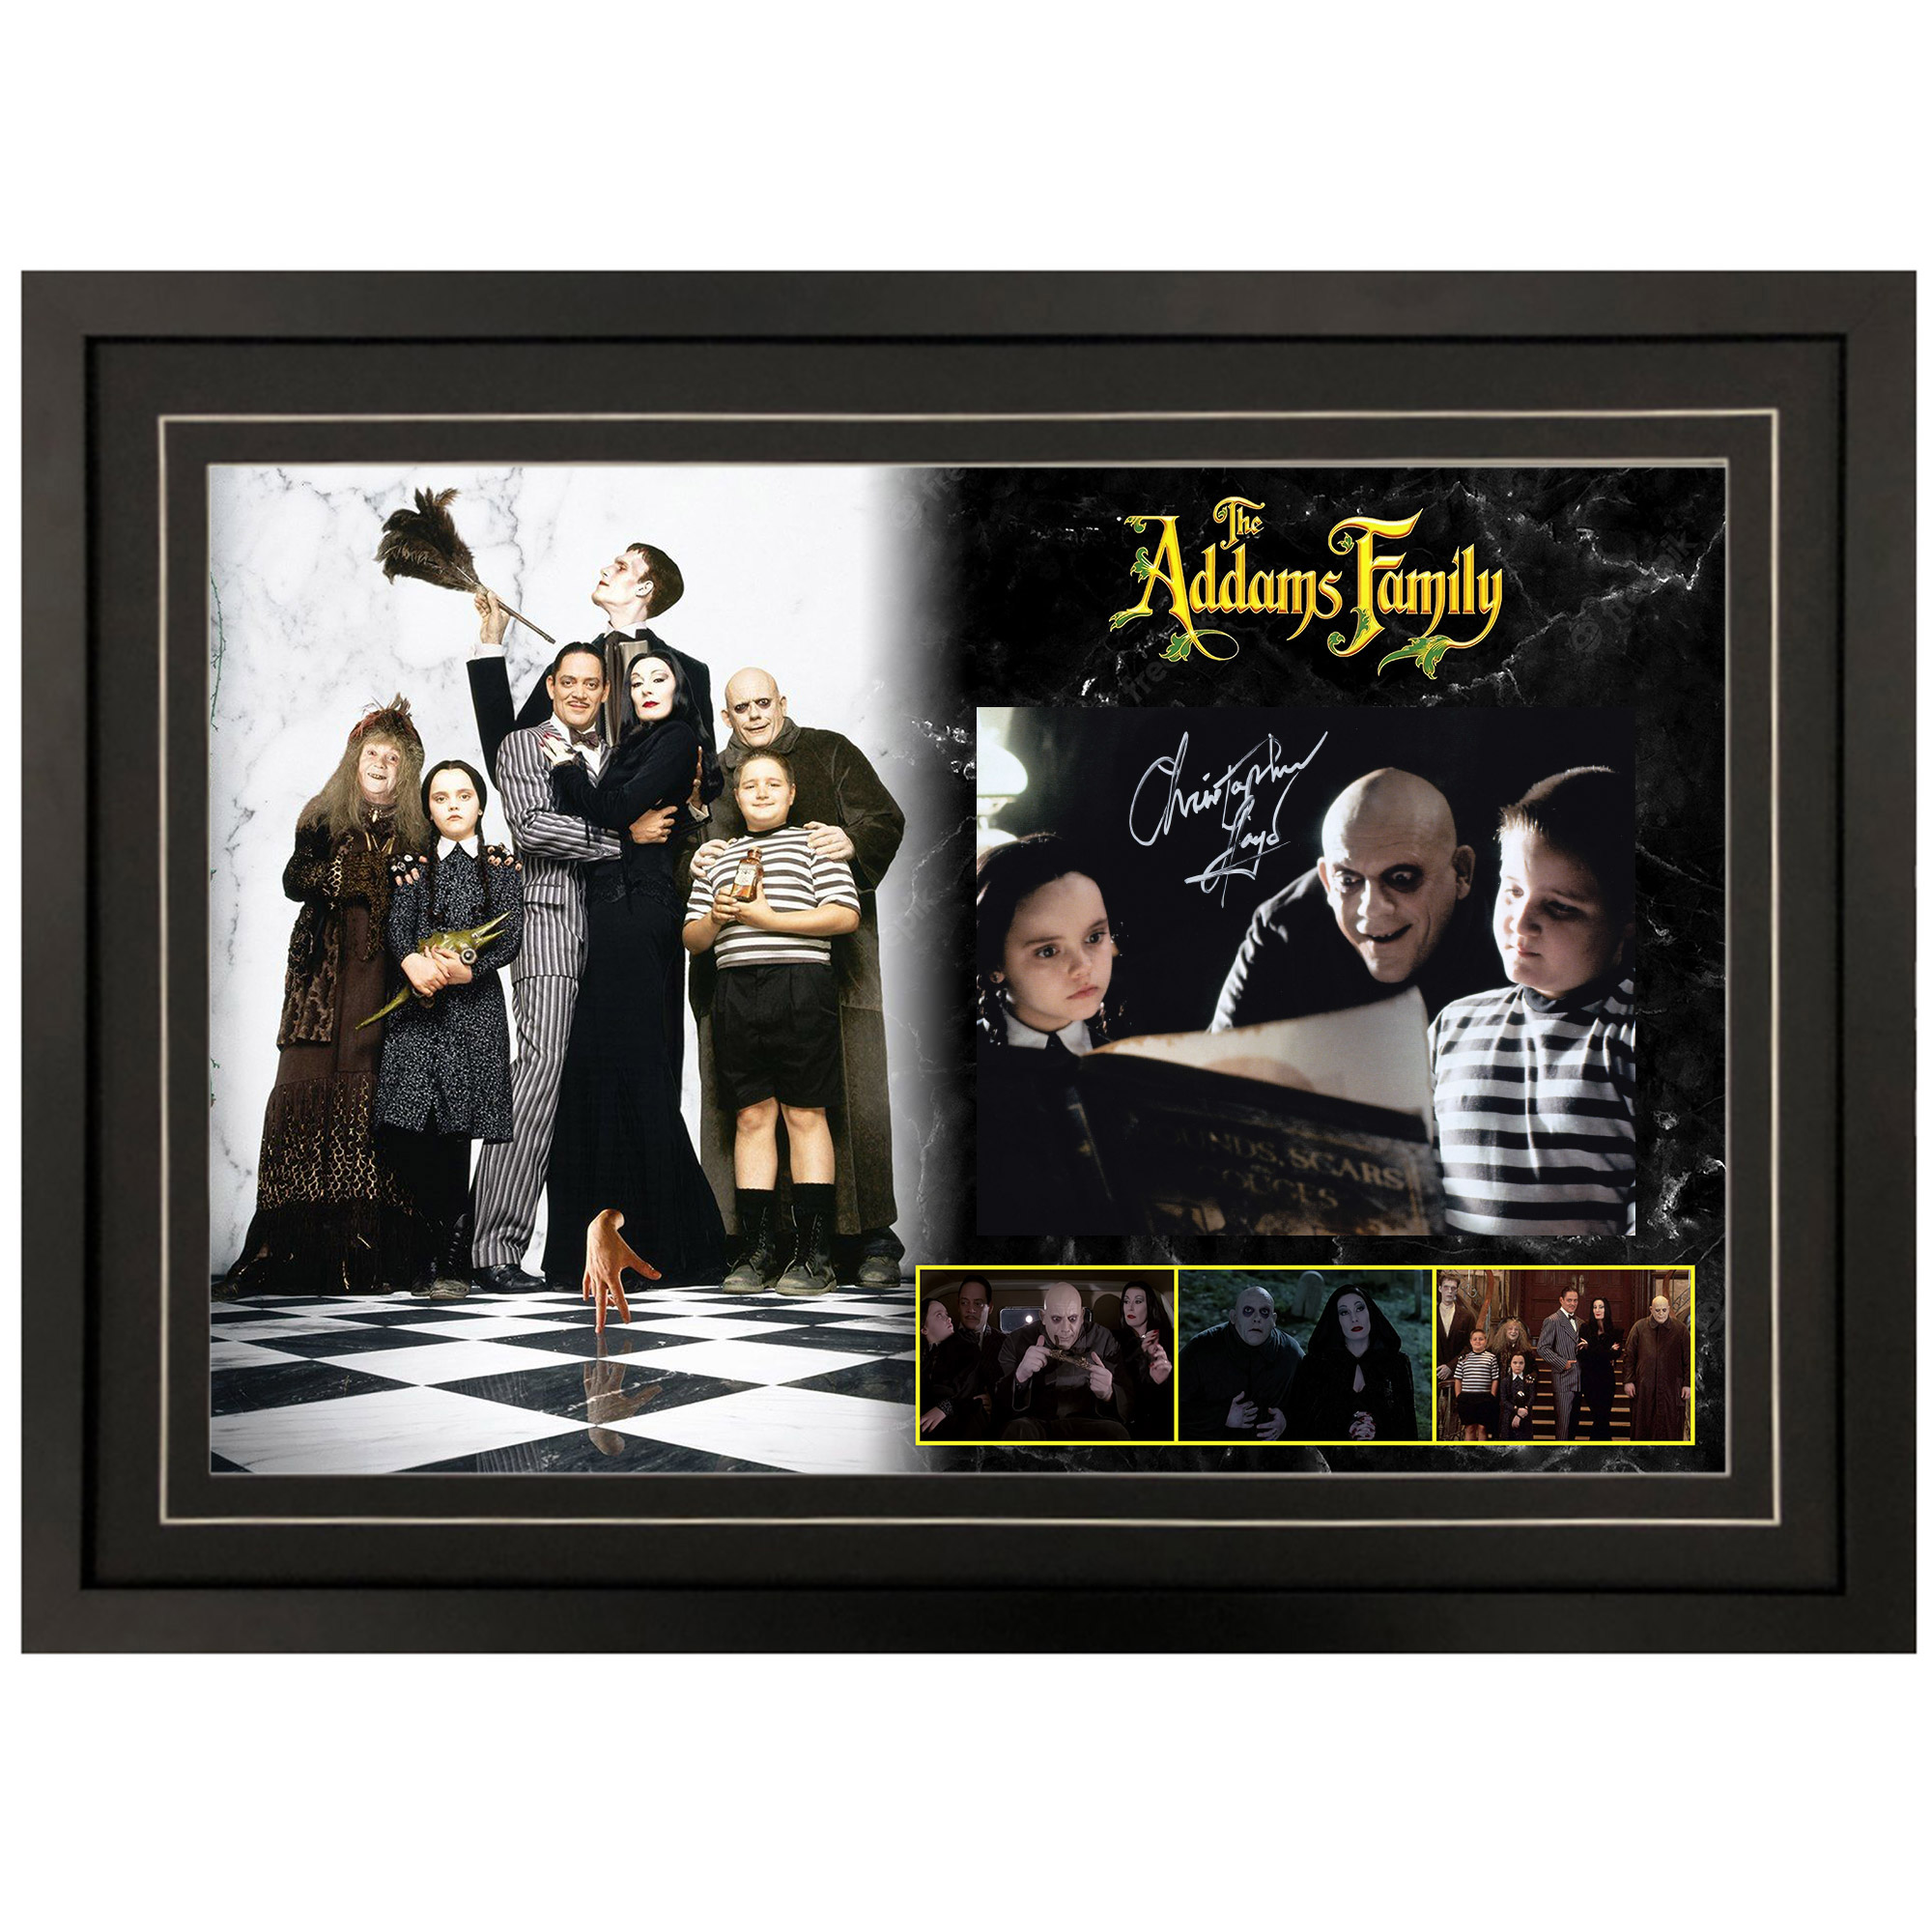 Christopher Lloyd – “The Addams Family” Uncle Fester...